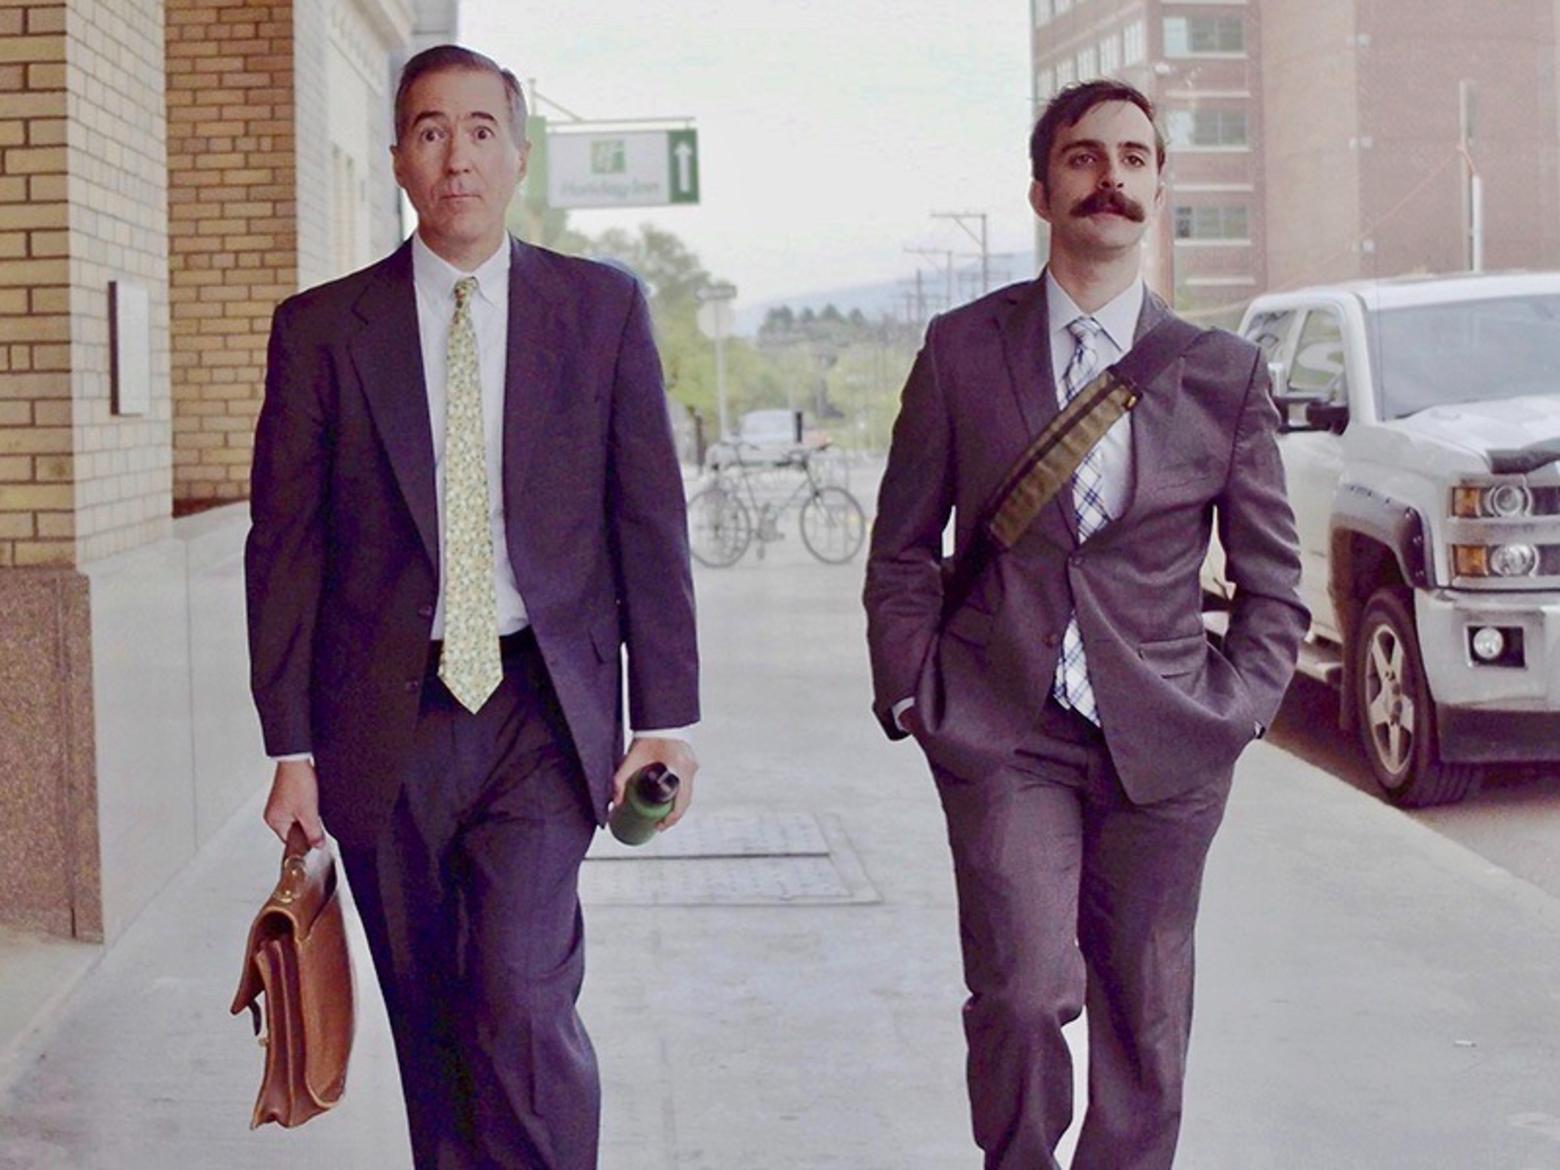 Senior EarthJustice attorney Tim Preso, left, arrives at the US District courthouse in Missoula on Aug. 30, 2018 along with colleague Josh Purtle. Together, they and others sought an injunction from Judge Dana L. Christensen, preventing Wyoming from moving forward with its first trophy hunt of grizzlies in 44 years. The state had set a quota of 23 bears. Christensen not only issued the injunction but a few weeks later issued a ruling that put Greater Yellowstone's grizzlies back under Endangered Species Act protections and challenged the US Fish and Wildlife Service to address key issues pertaining to grizzly recovery. Christensen's position was upheld on July 8, 2020 by the Ninth Circuit Court of Appeals. Photo courtesy Chris Jordan Bloch/EarthJustice 